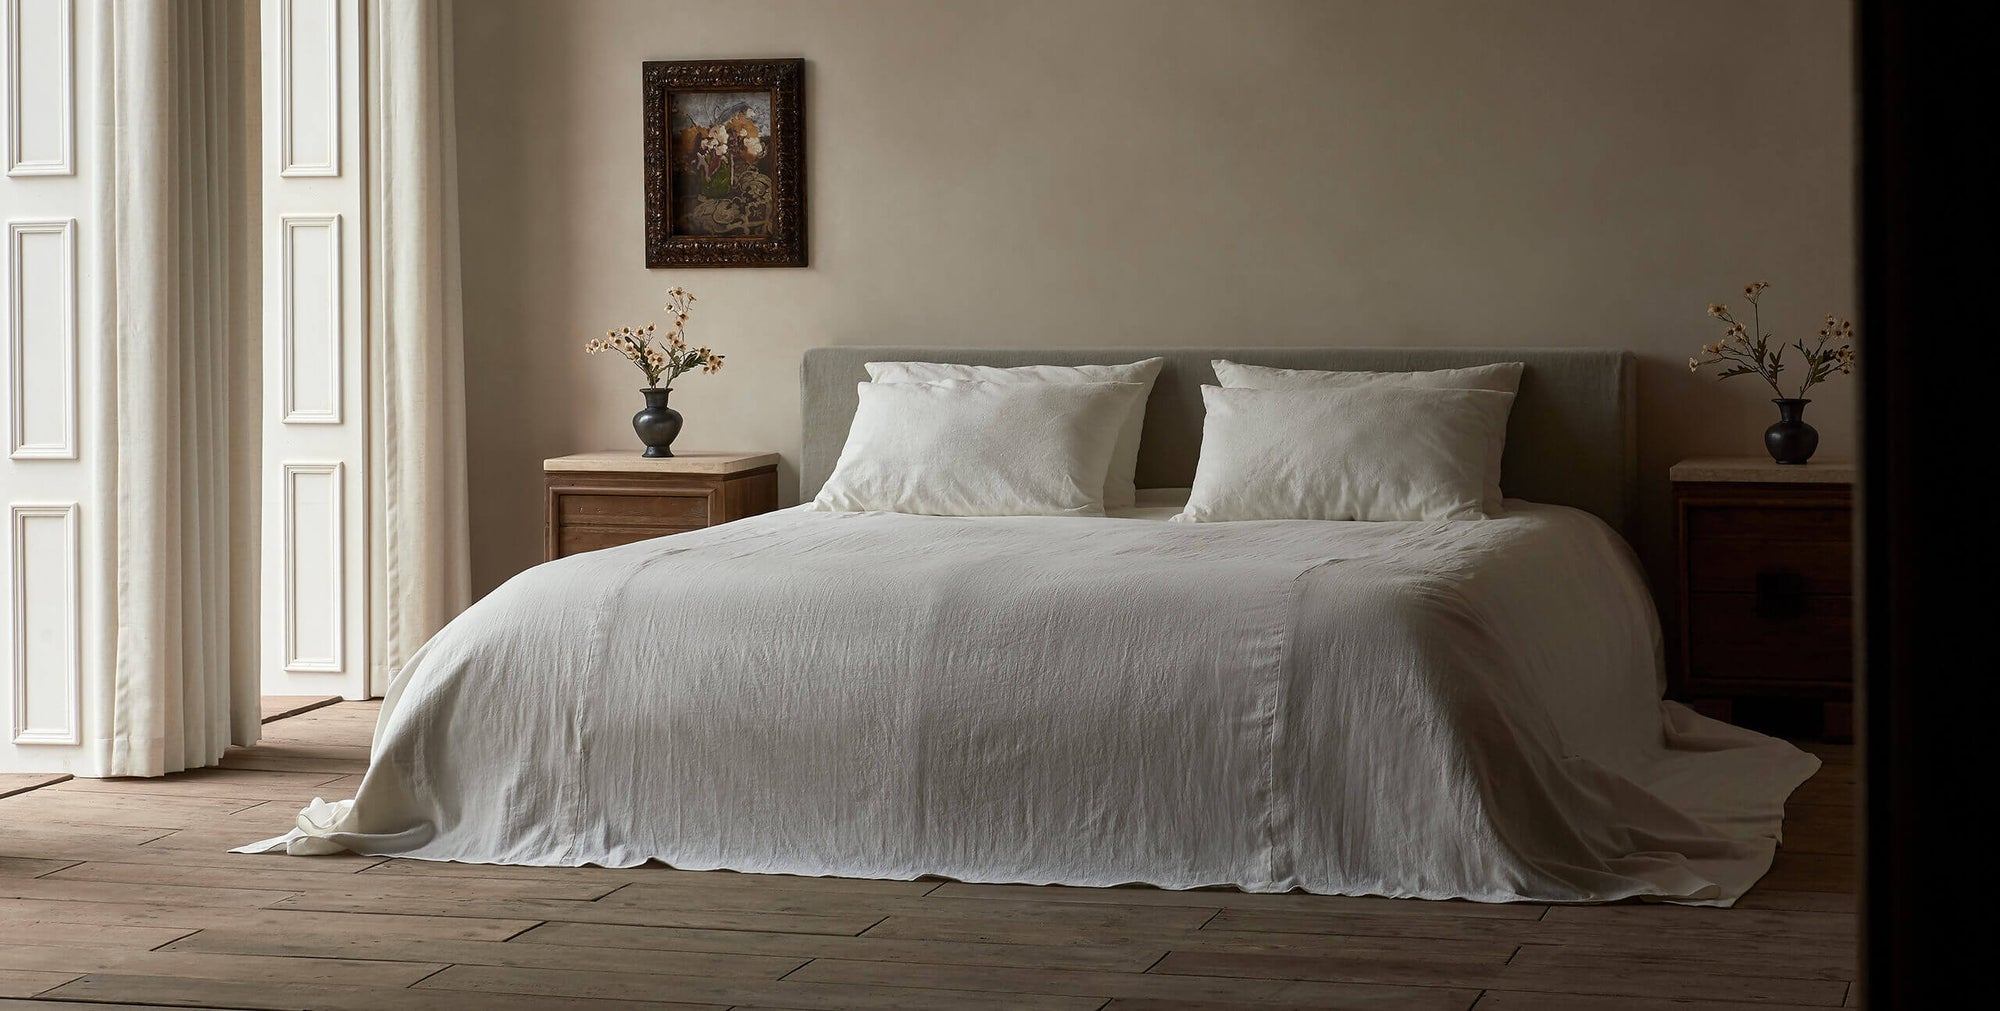 Devyn King Sized Bed Frame in Jasmine Rice, a light warm greige Medium Weight Linen, made up with white linen bedding